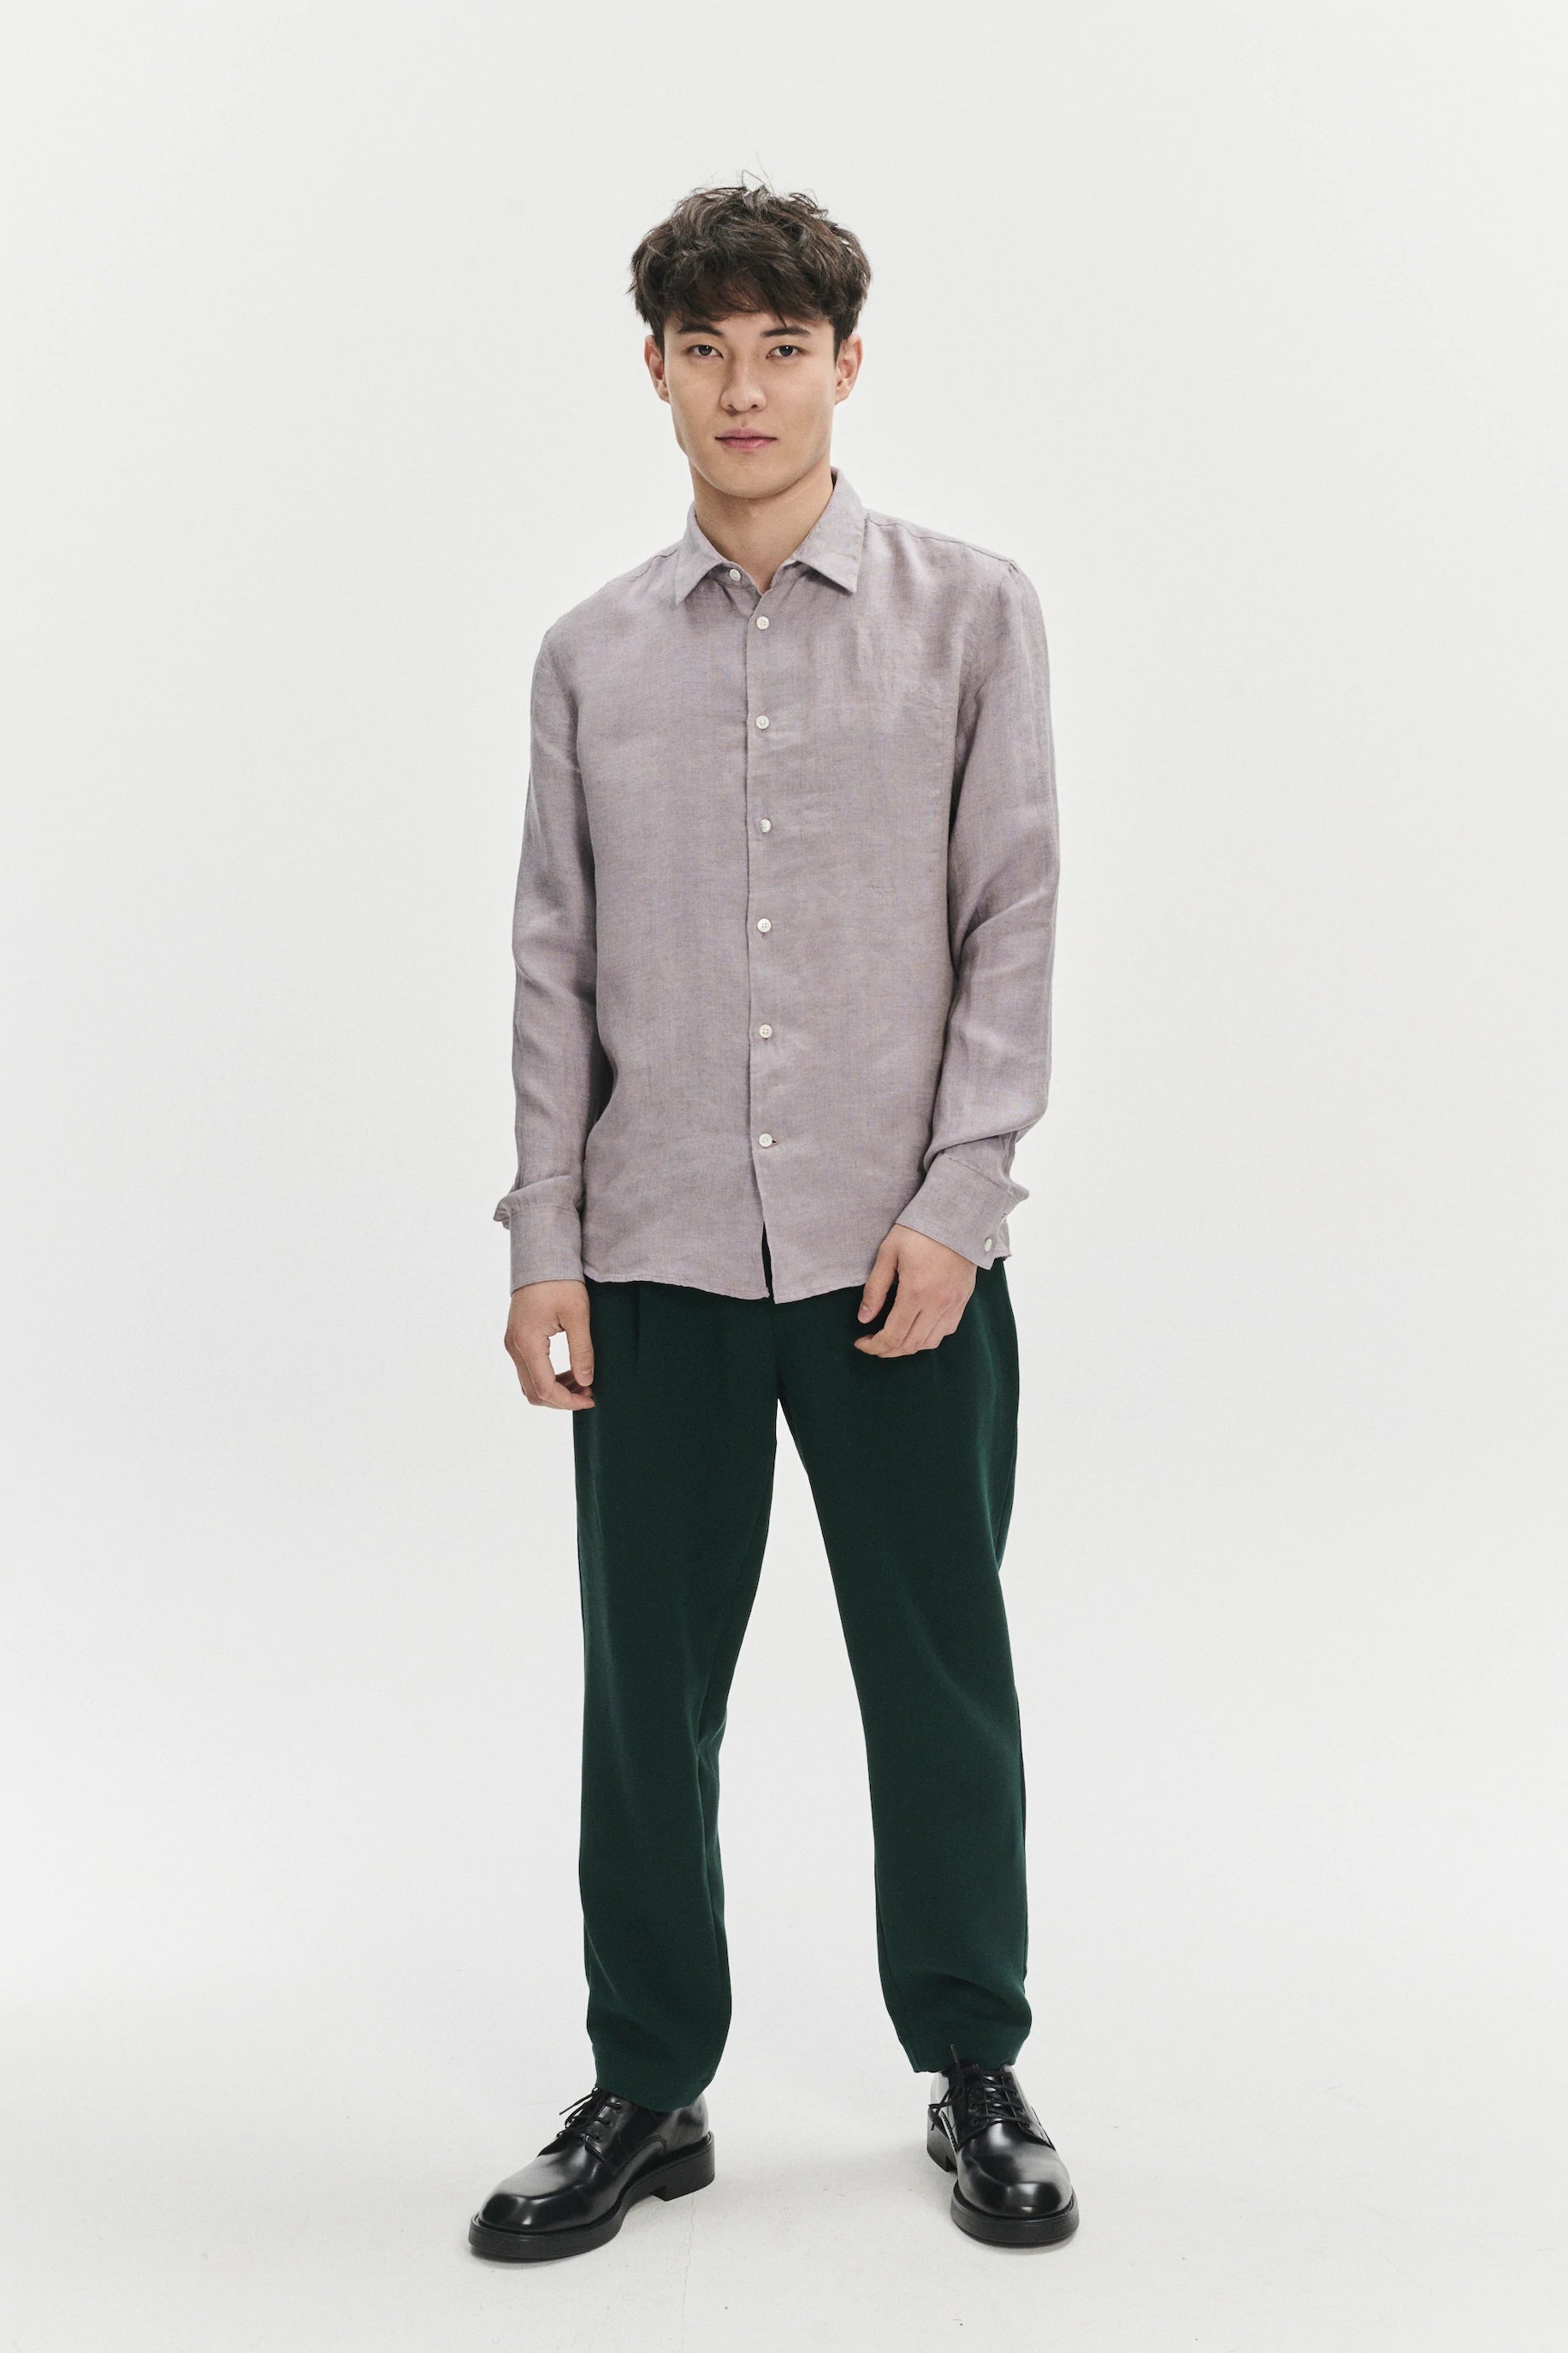 feel-good-shirt-in-a-lavender-rich-structured-italian-oxford-linen